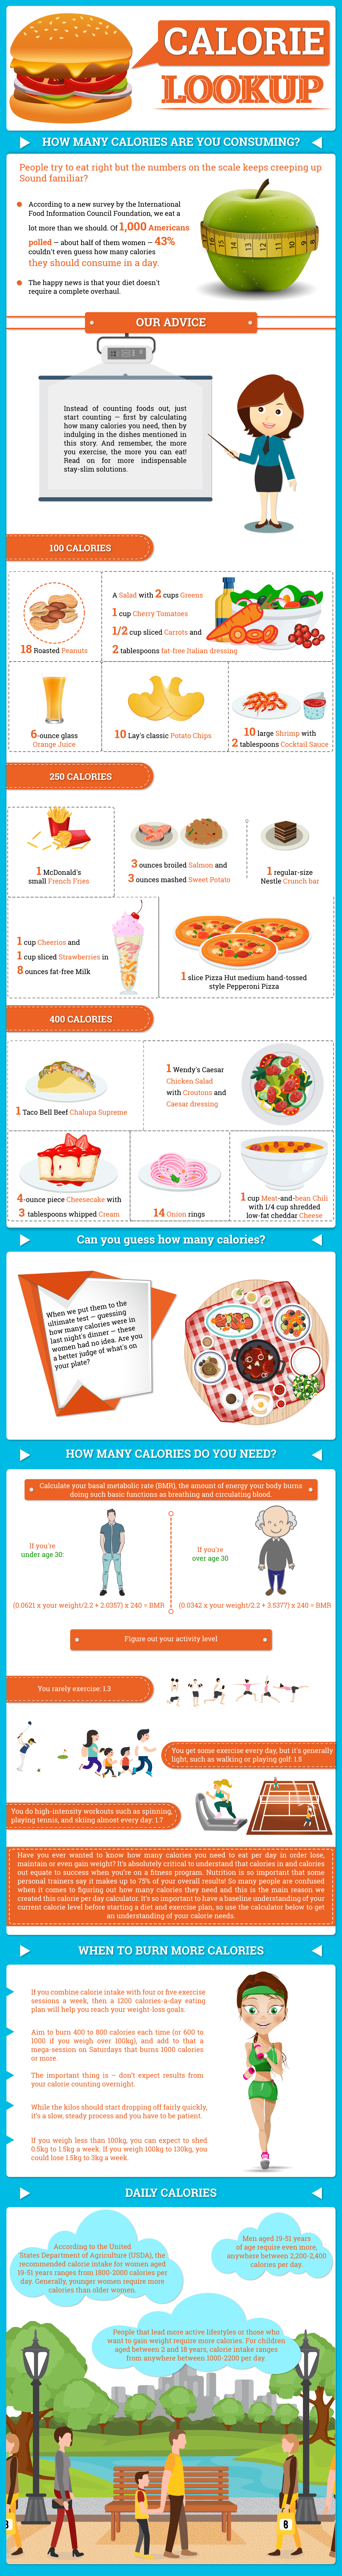 calorie-lookup-infographic